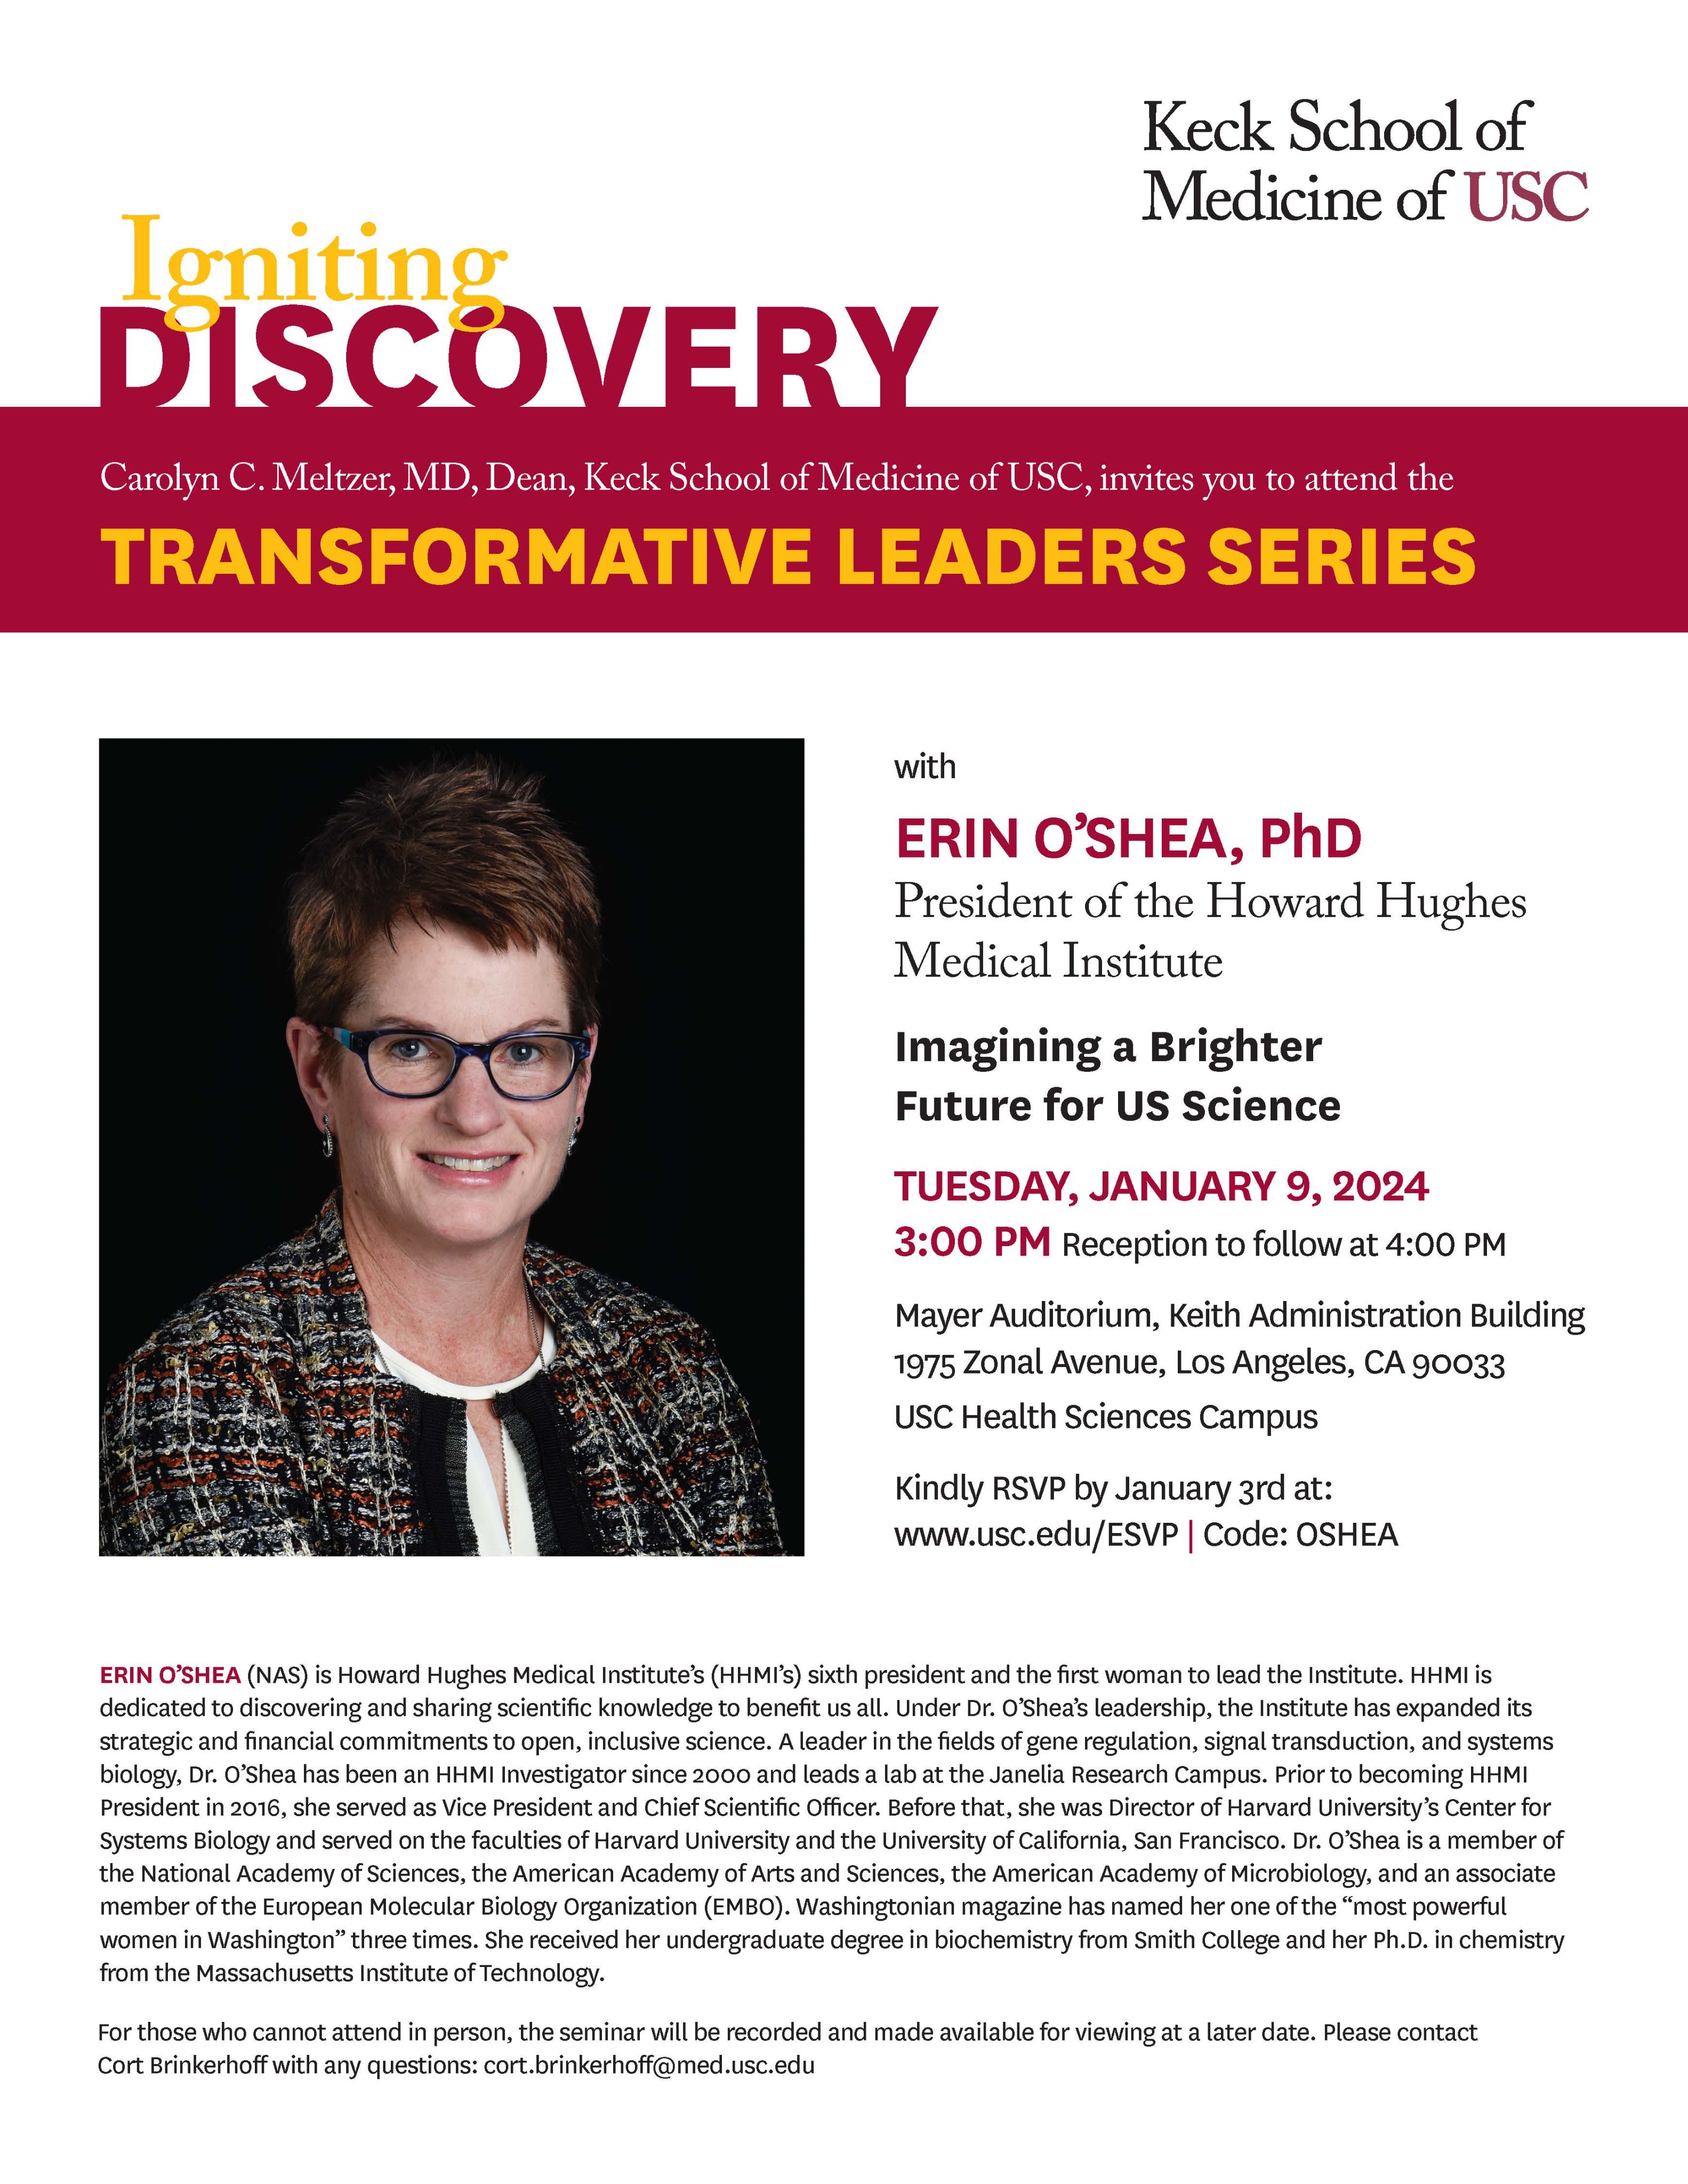 USC Research and Innovation on X: Keck School Dean Carolyn Meltzer is  hosting a seminar with Erin O'Shea, President of the Howard Hughes Medical  Institute, on Imagining a Brighter Future for US